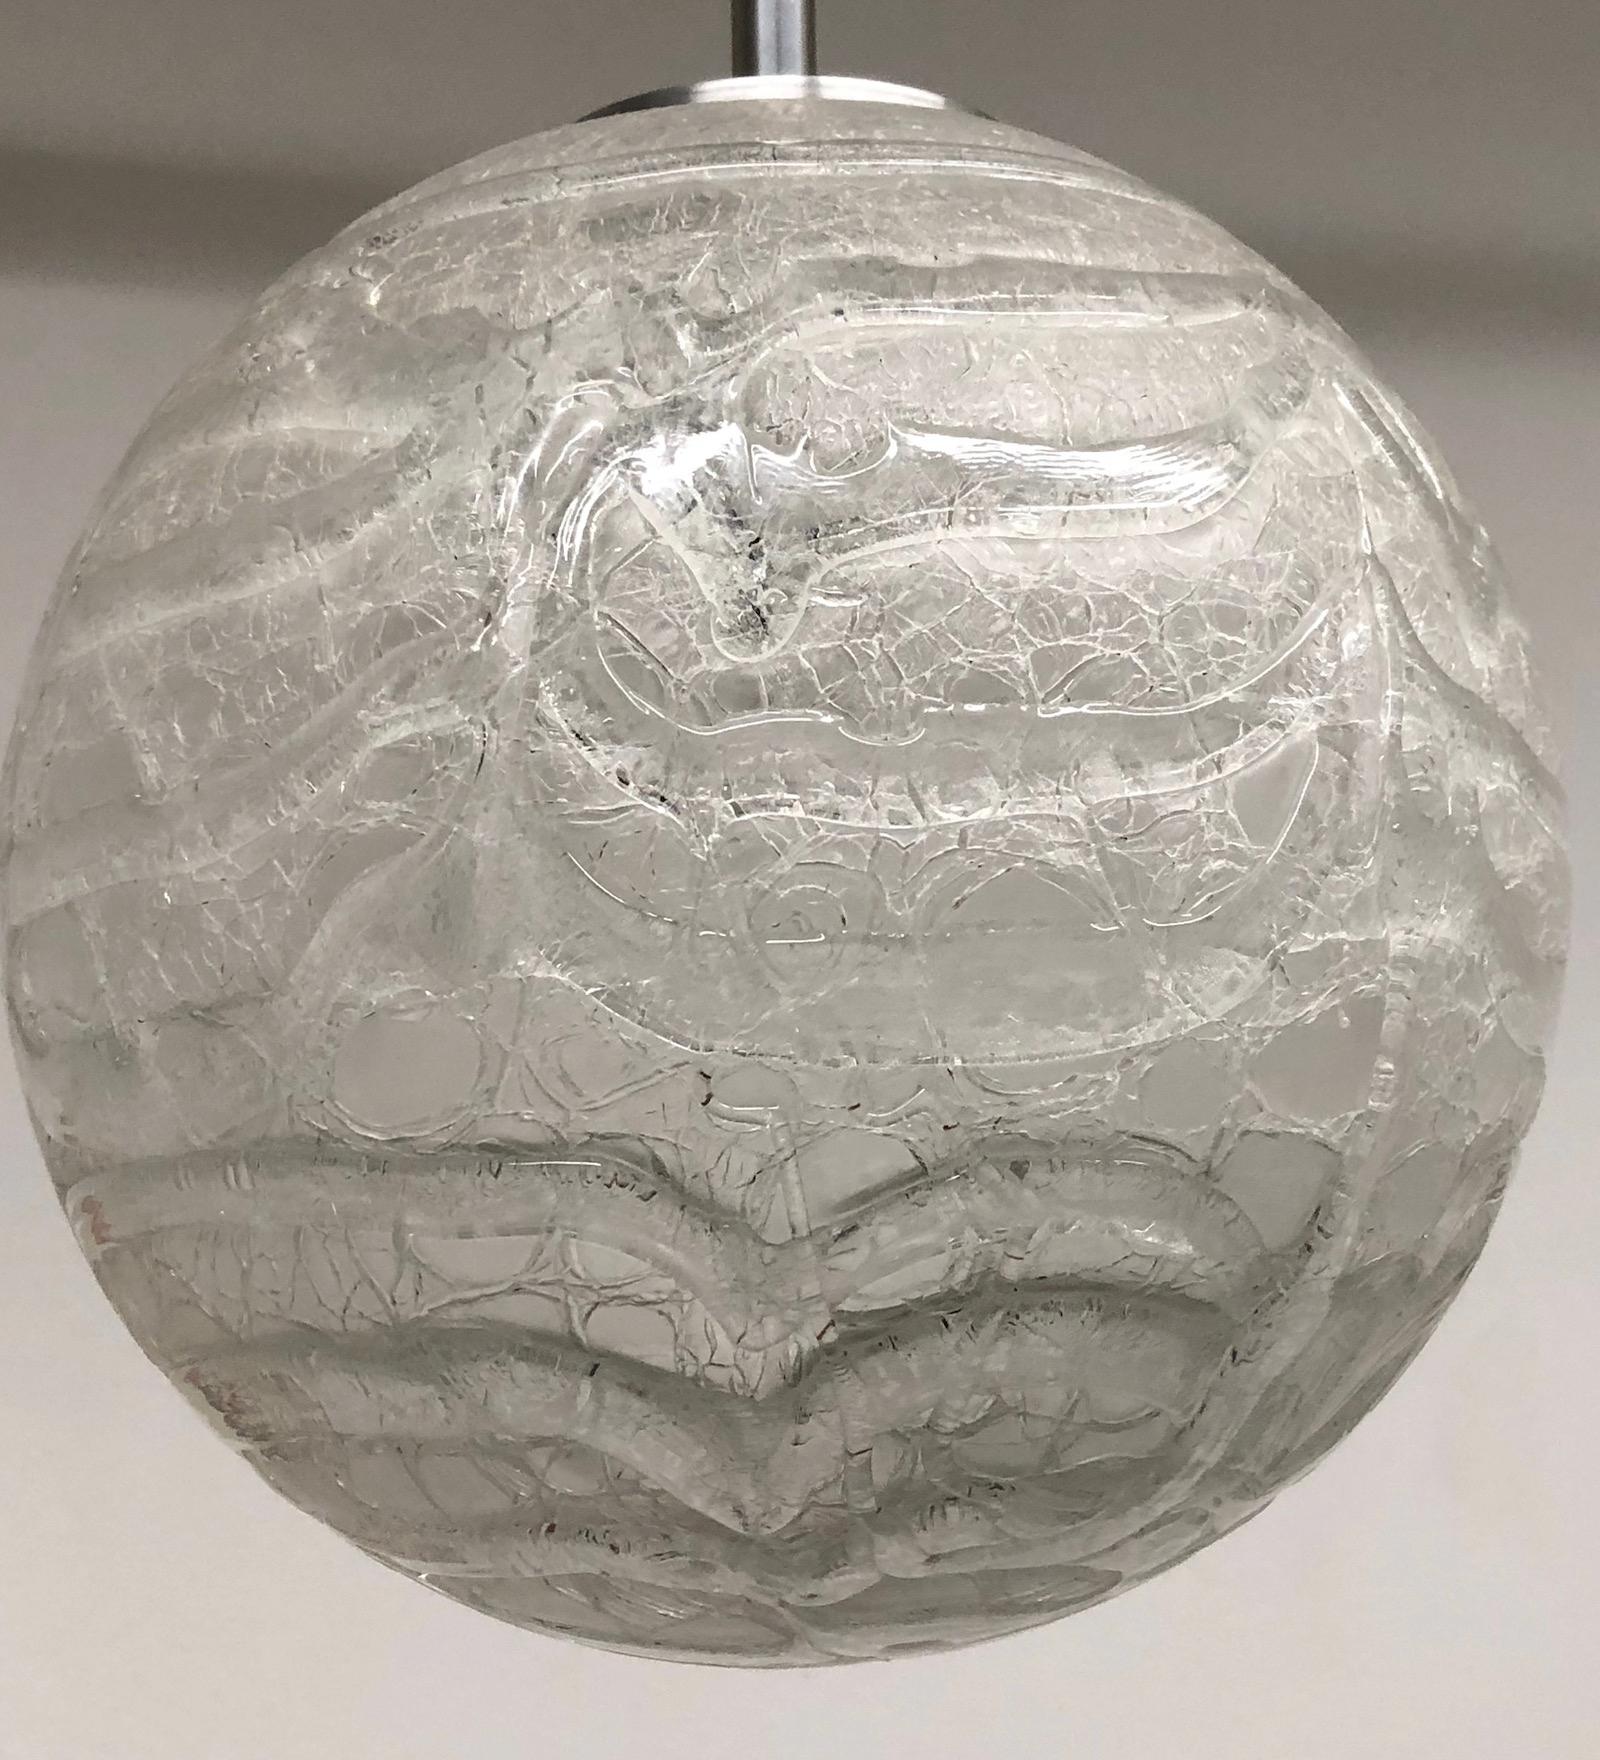 Large vintage snow ball pattern midcentury Murano glass ceiling pendant light fixture by Doria Leuchten, Germany. Made in the later half of the 1960s, this gorgeous pendent features wonderfully made, mouth blown Murano glass which looks like a